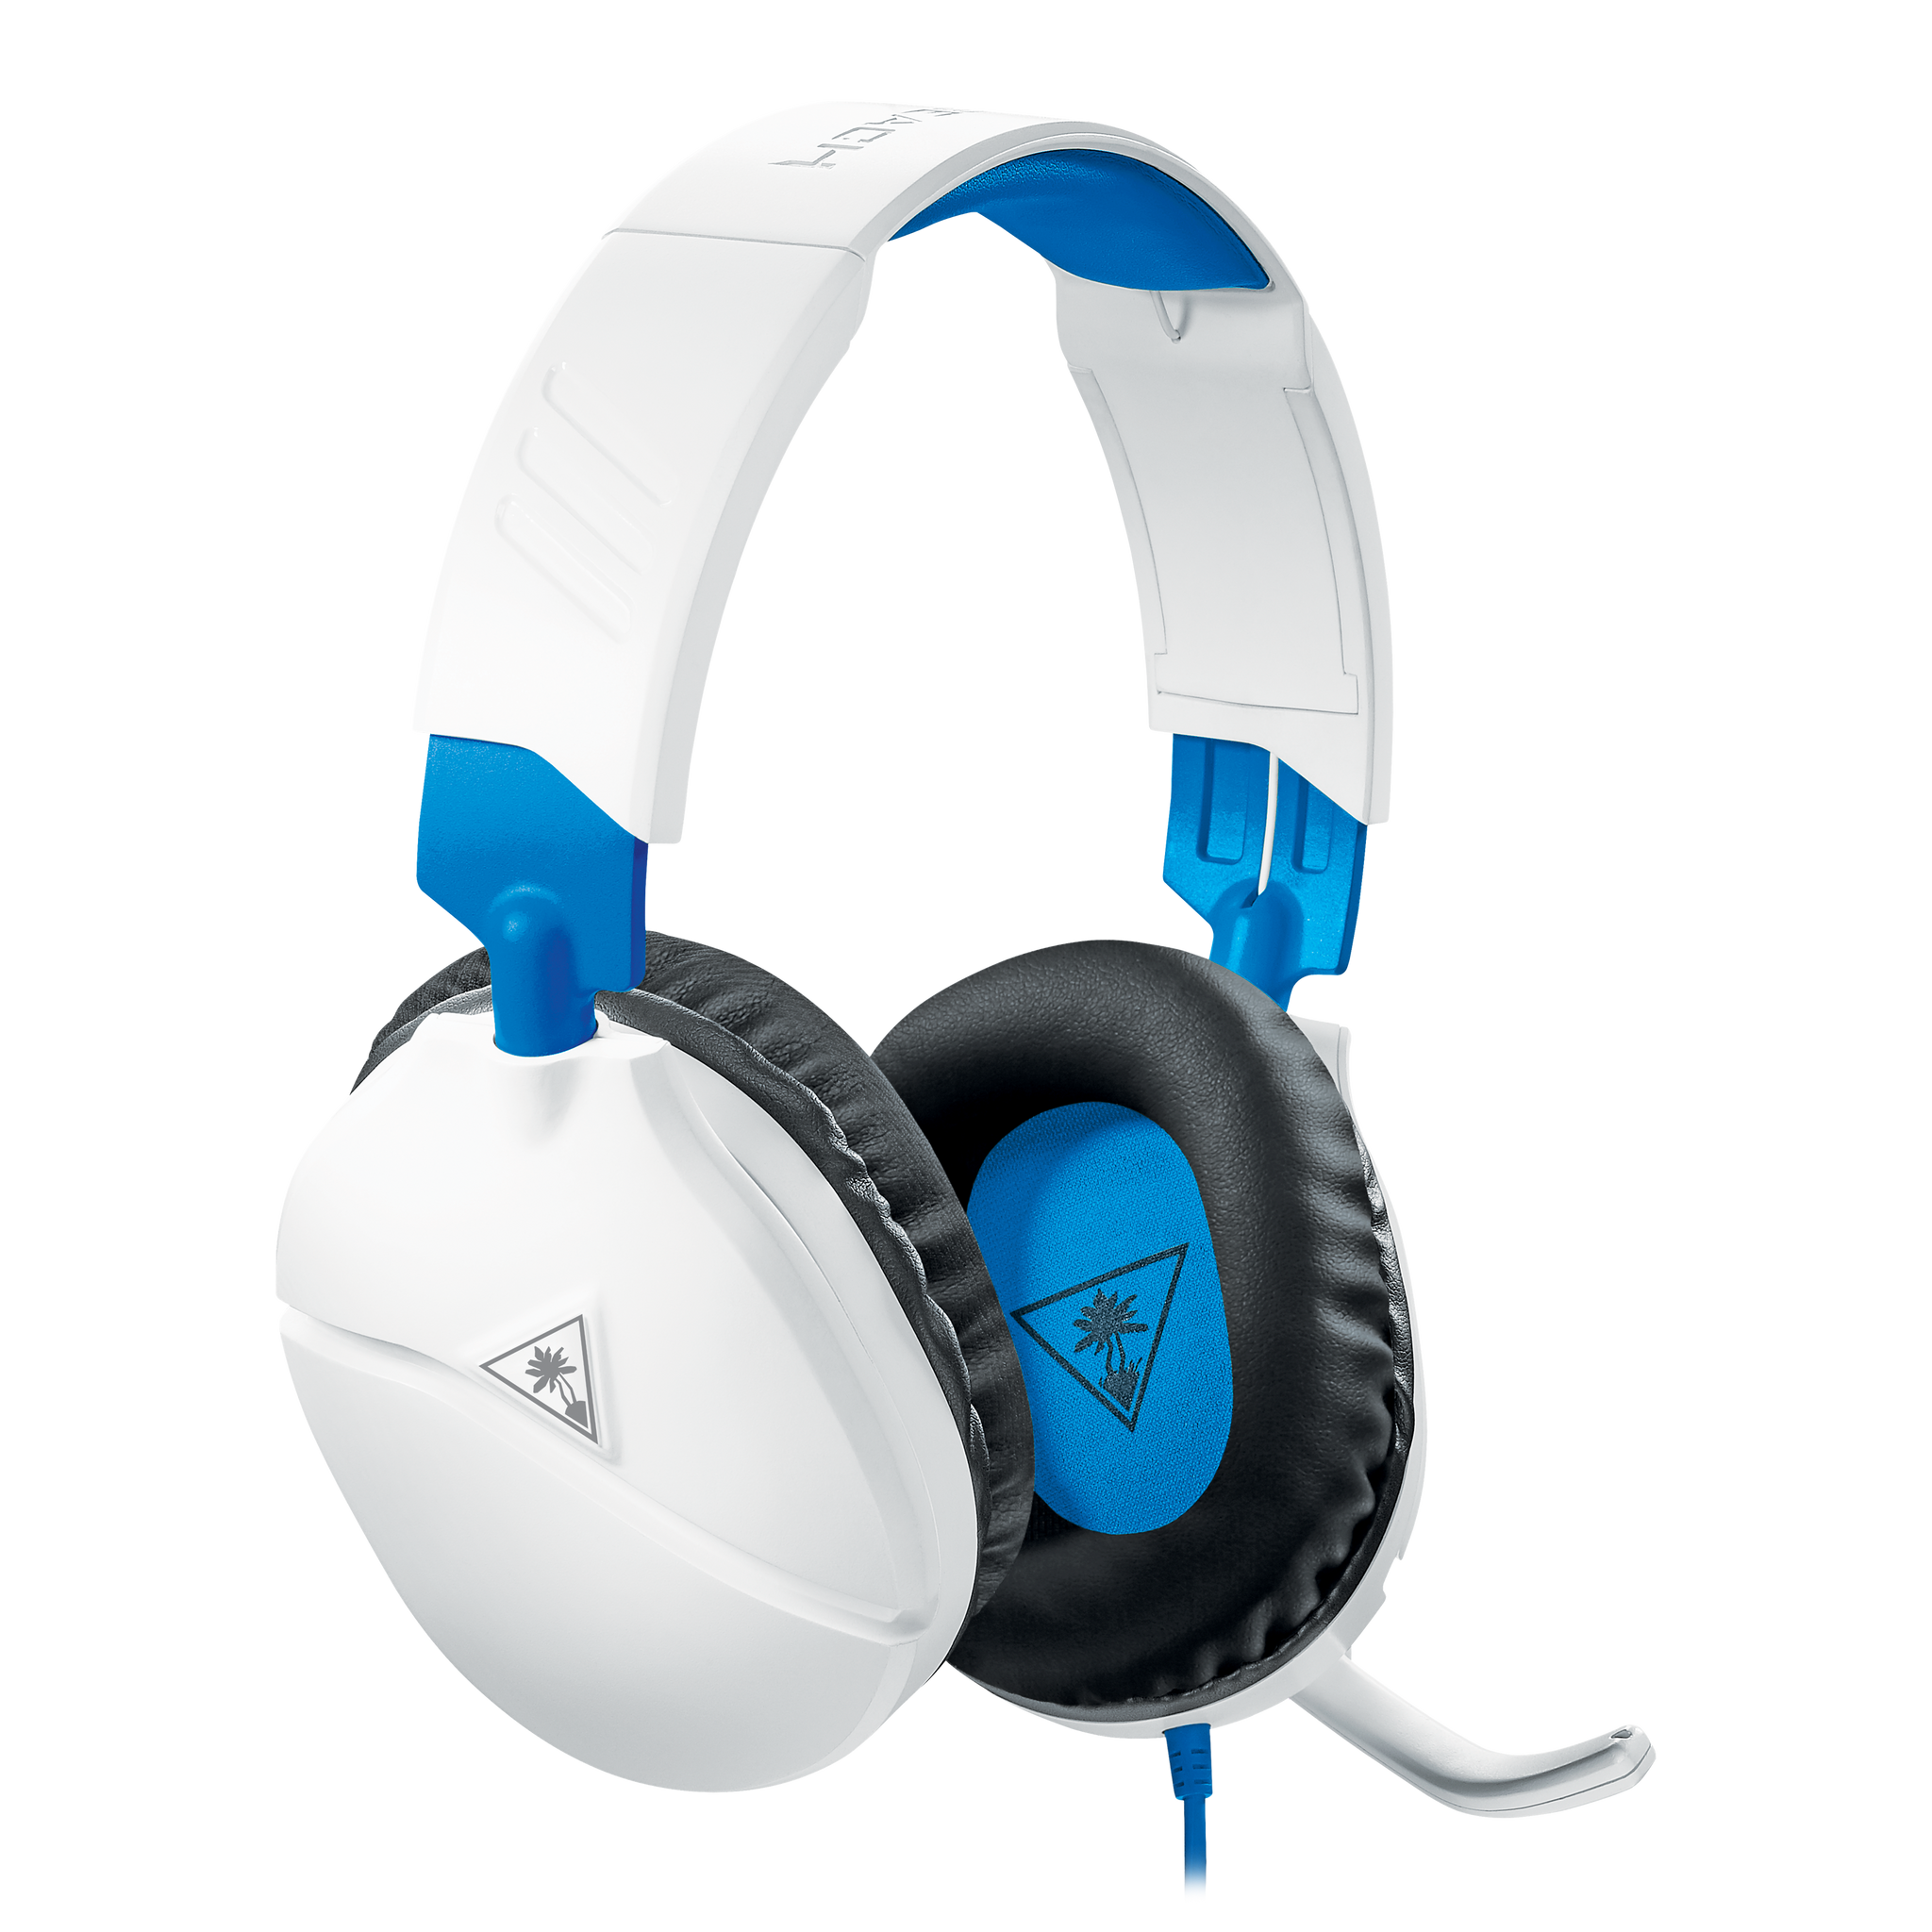 Recon 70 Headset for PS4™ Pro & PS4™ - White